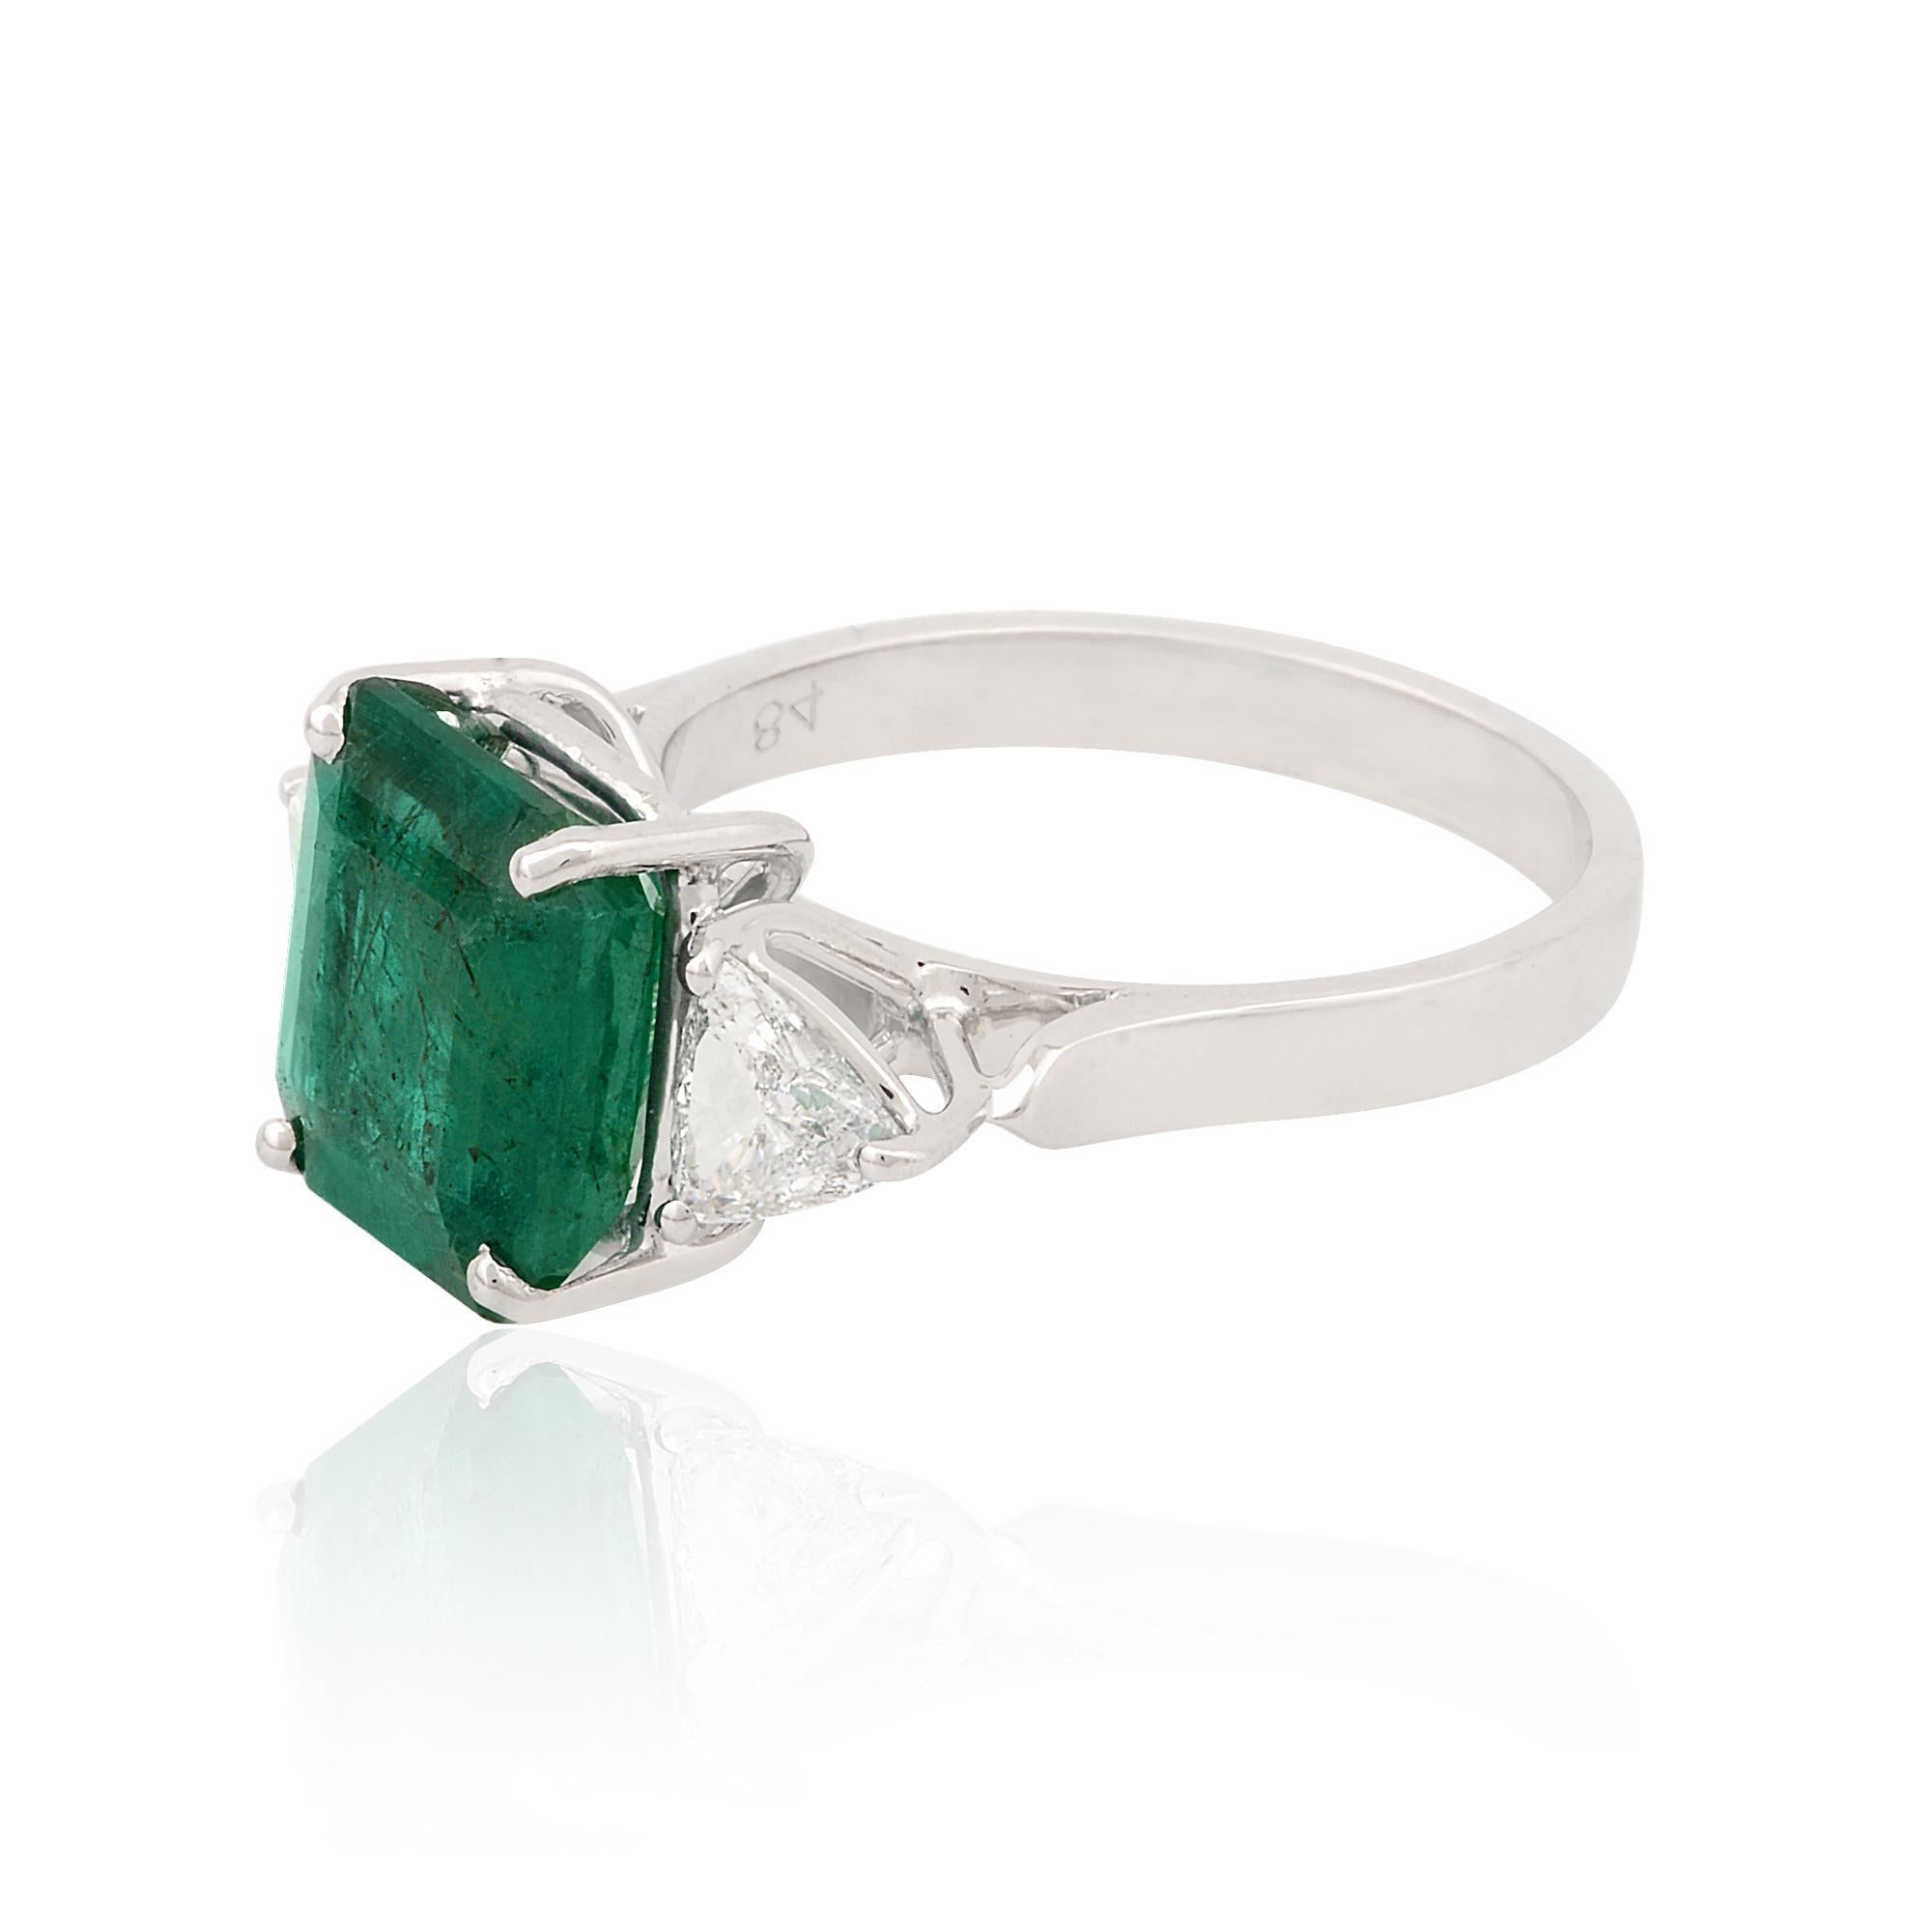 Cushion Cut Zambian Emerald Gemstone Cocktail Ring Pear Diamond Solid 18k White Gold Jewelry For Sale